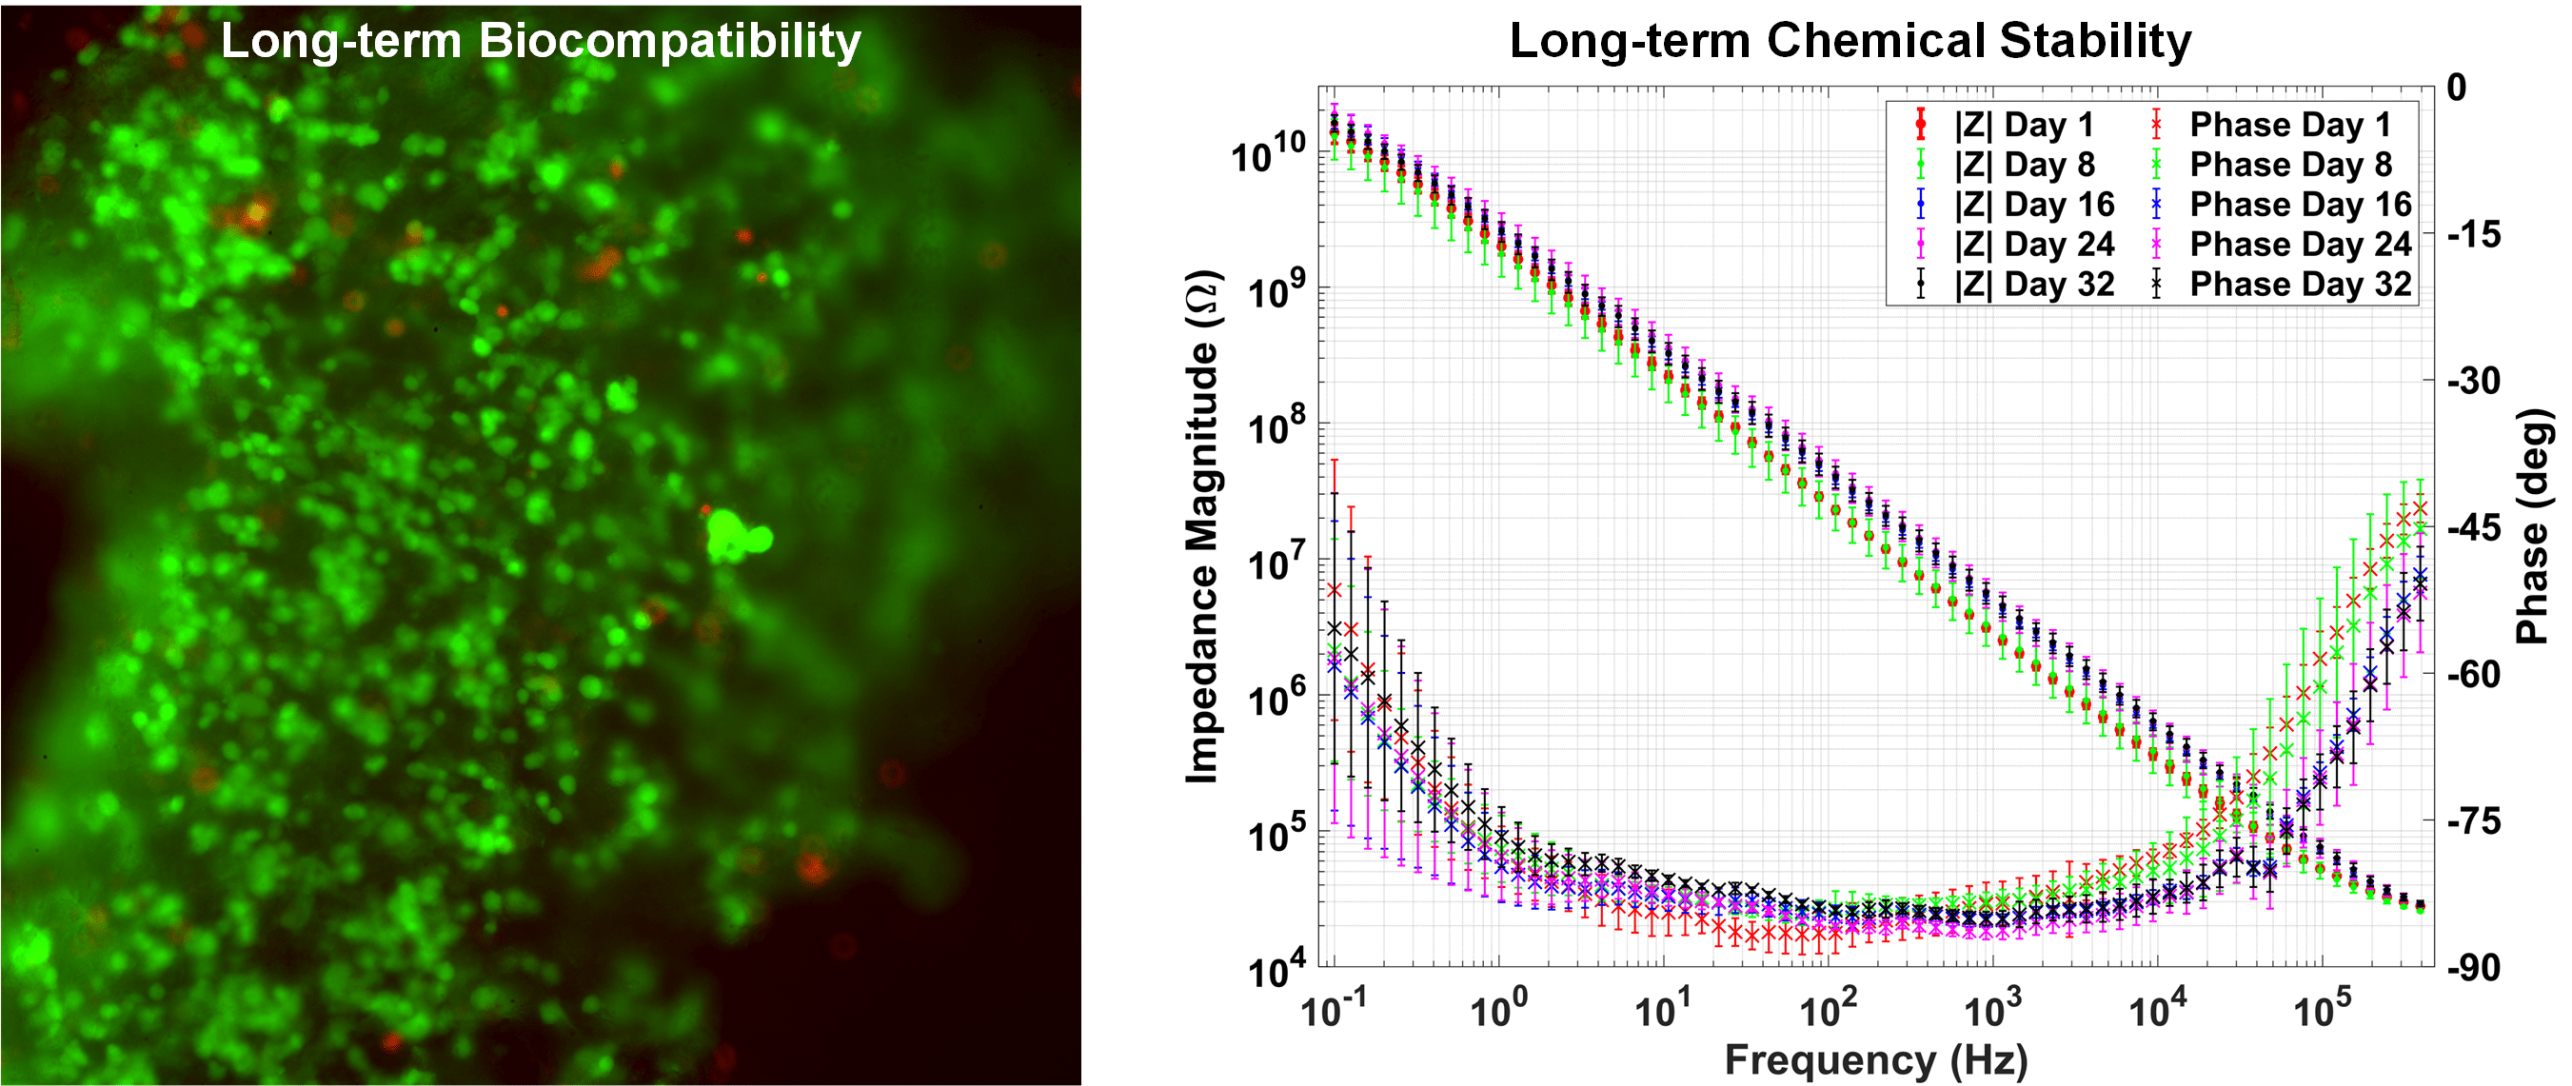  (Left) Live/dead analysis of on-chip cultured encapsulating human stem cell-derived neurons. Green indicated viable cells while red labels dead cells, thereby showing excellent biocompatibility with minimal cell death over a month of culturing. (Right) Long-term electrochemical impedance spectroscopy measurements of on-chip 8.84 μm × 11 μm Pt electrode-culture medium interface, demonstrating robust chemical stability with no observed signs of electrode degradation.